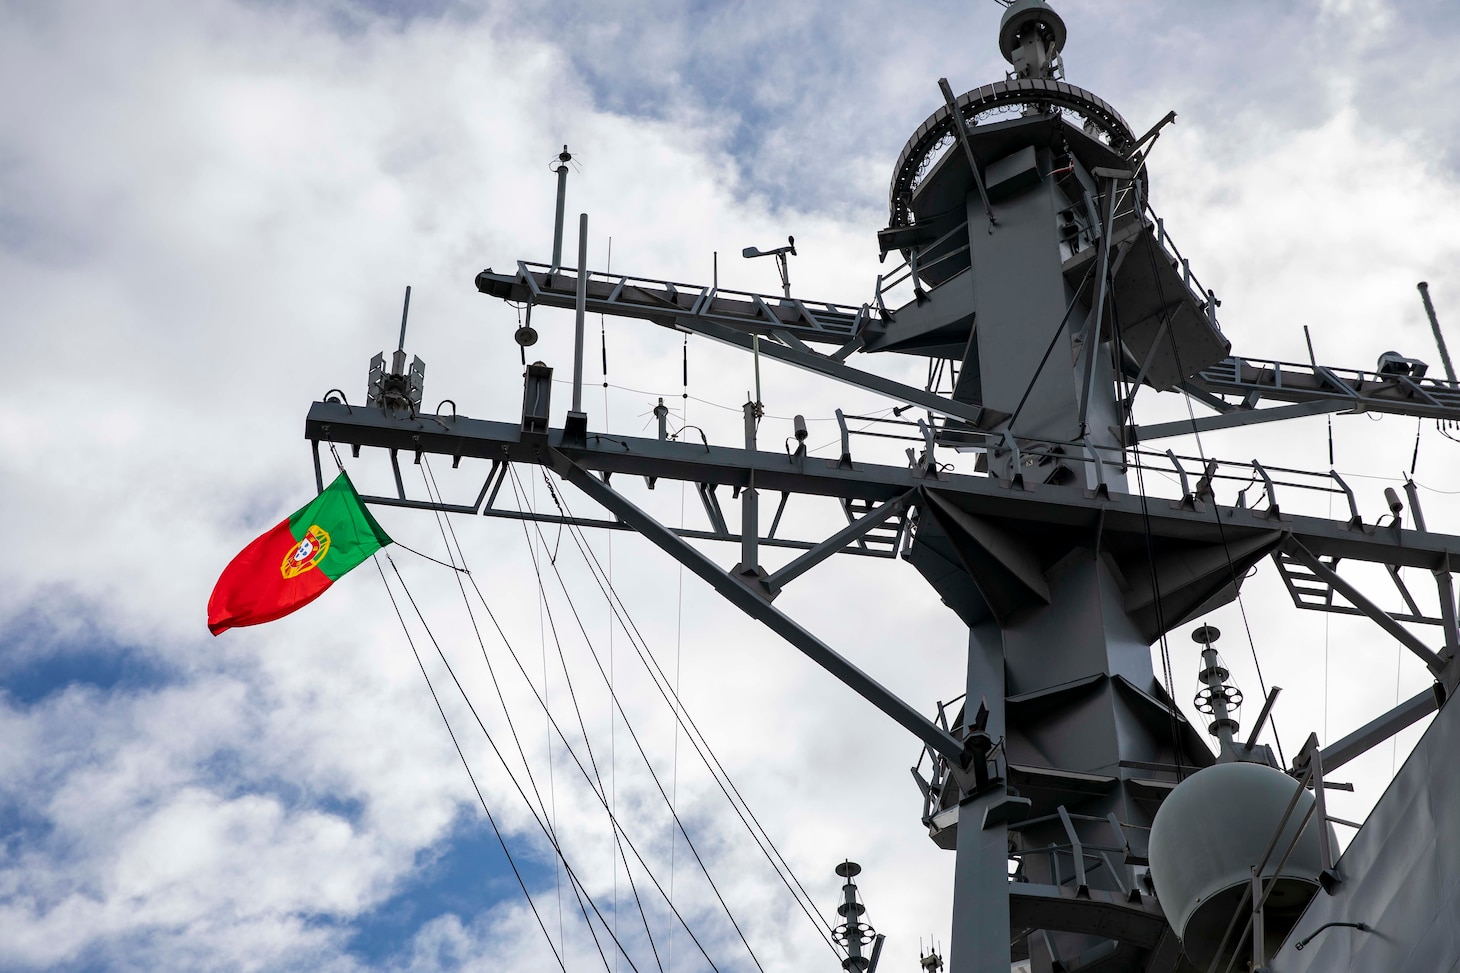 FUNCHAL, Portugal (Feb 24, 2023) The Arleigh Burke-class guided-missile destroyer USS Porter (DDG 78) flies the Flag of Portugal while moored in Funchal, Feb. 24, 2023. Porter is on a scheduled deployment in the U.S. Naval Forces Europe area of operations, employed by the U.S. Sixth Fleet to defend U.S., allied and partner interests. (U.S. Navy photo by Mass Communication Specialist 2nd Class Sawyer Connally)